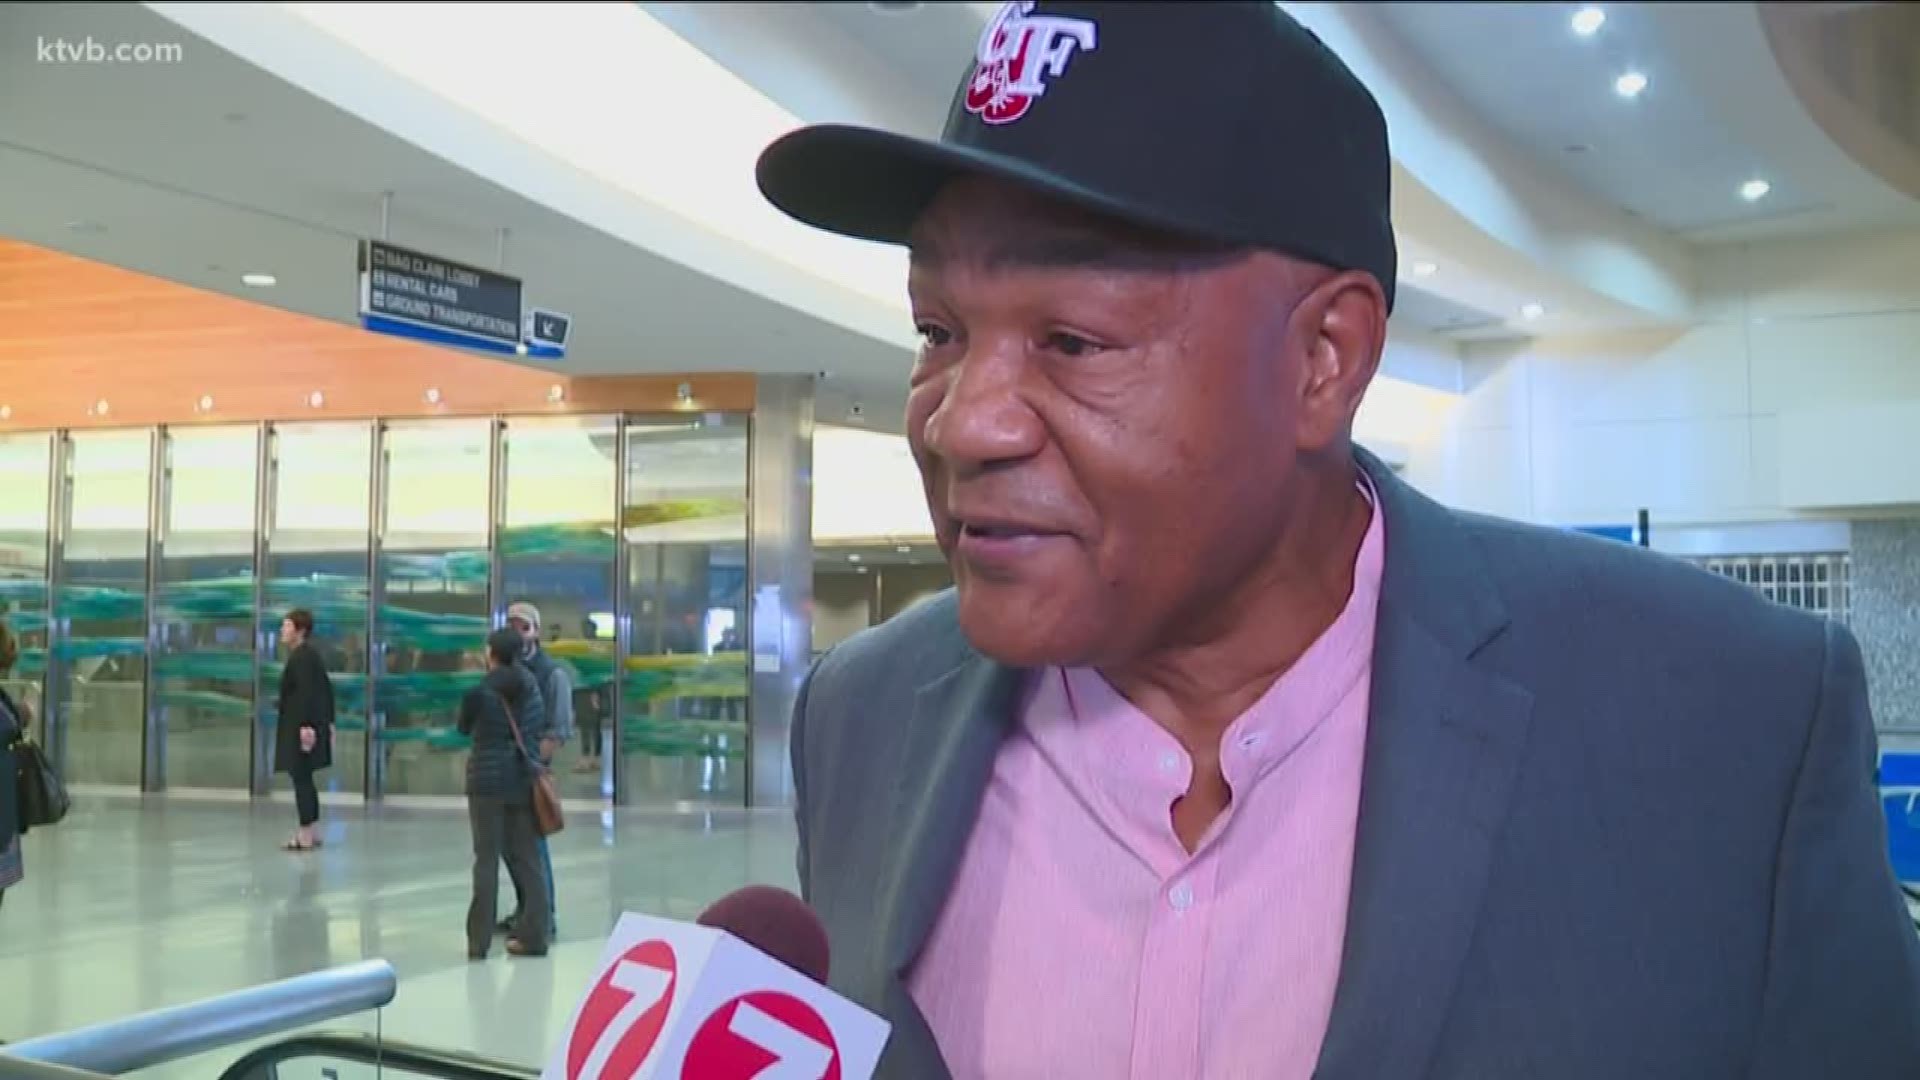 The former world heavyweight champ is in Boise to receive an Idaho Humanitarian Award for his work with underprivileged kids in the Houston area.